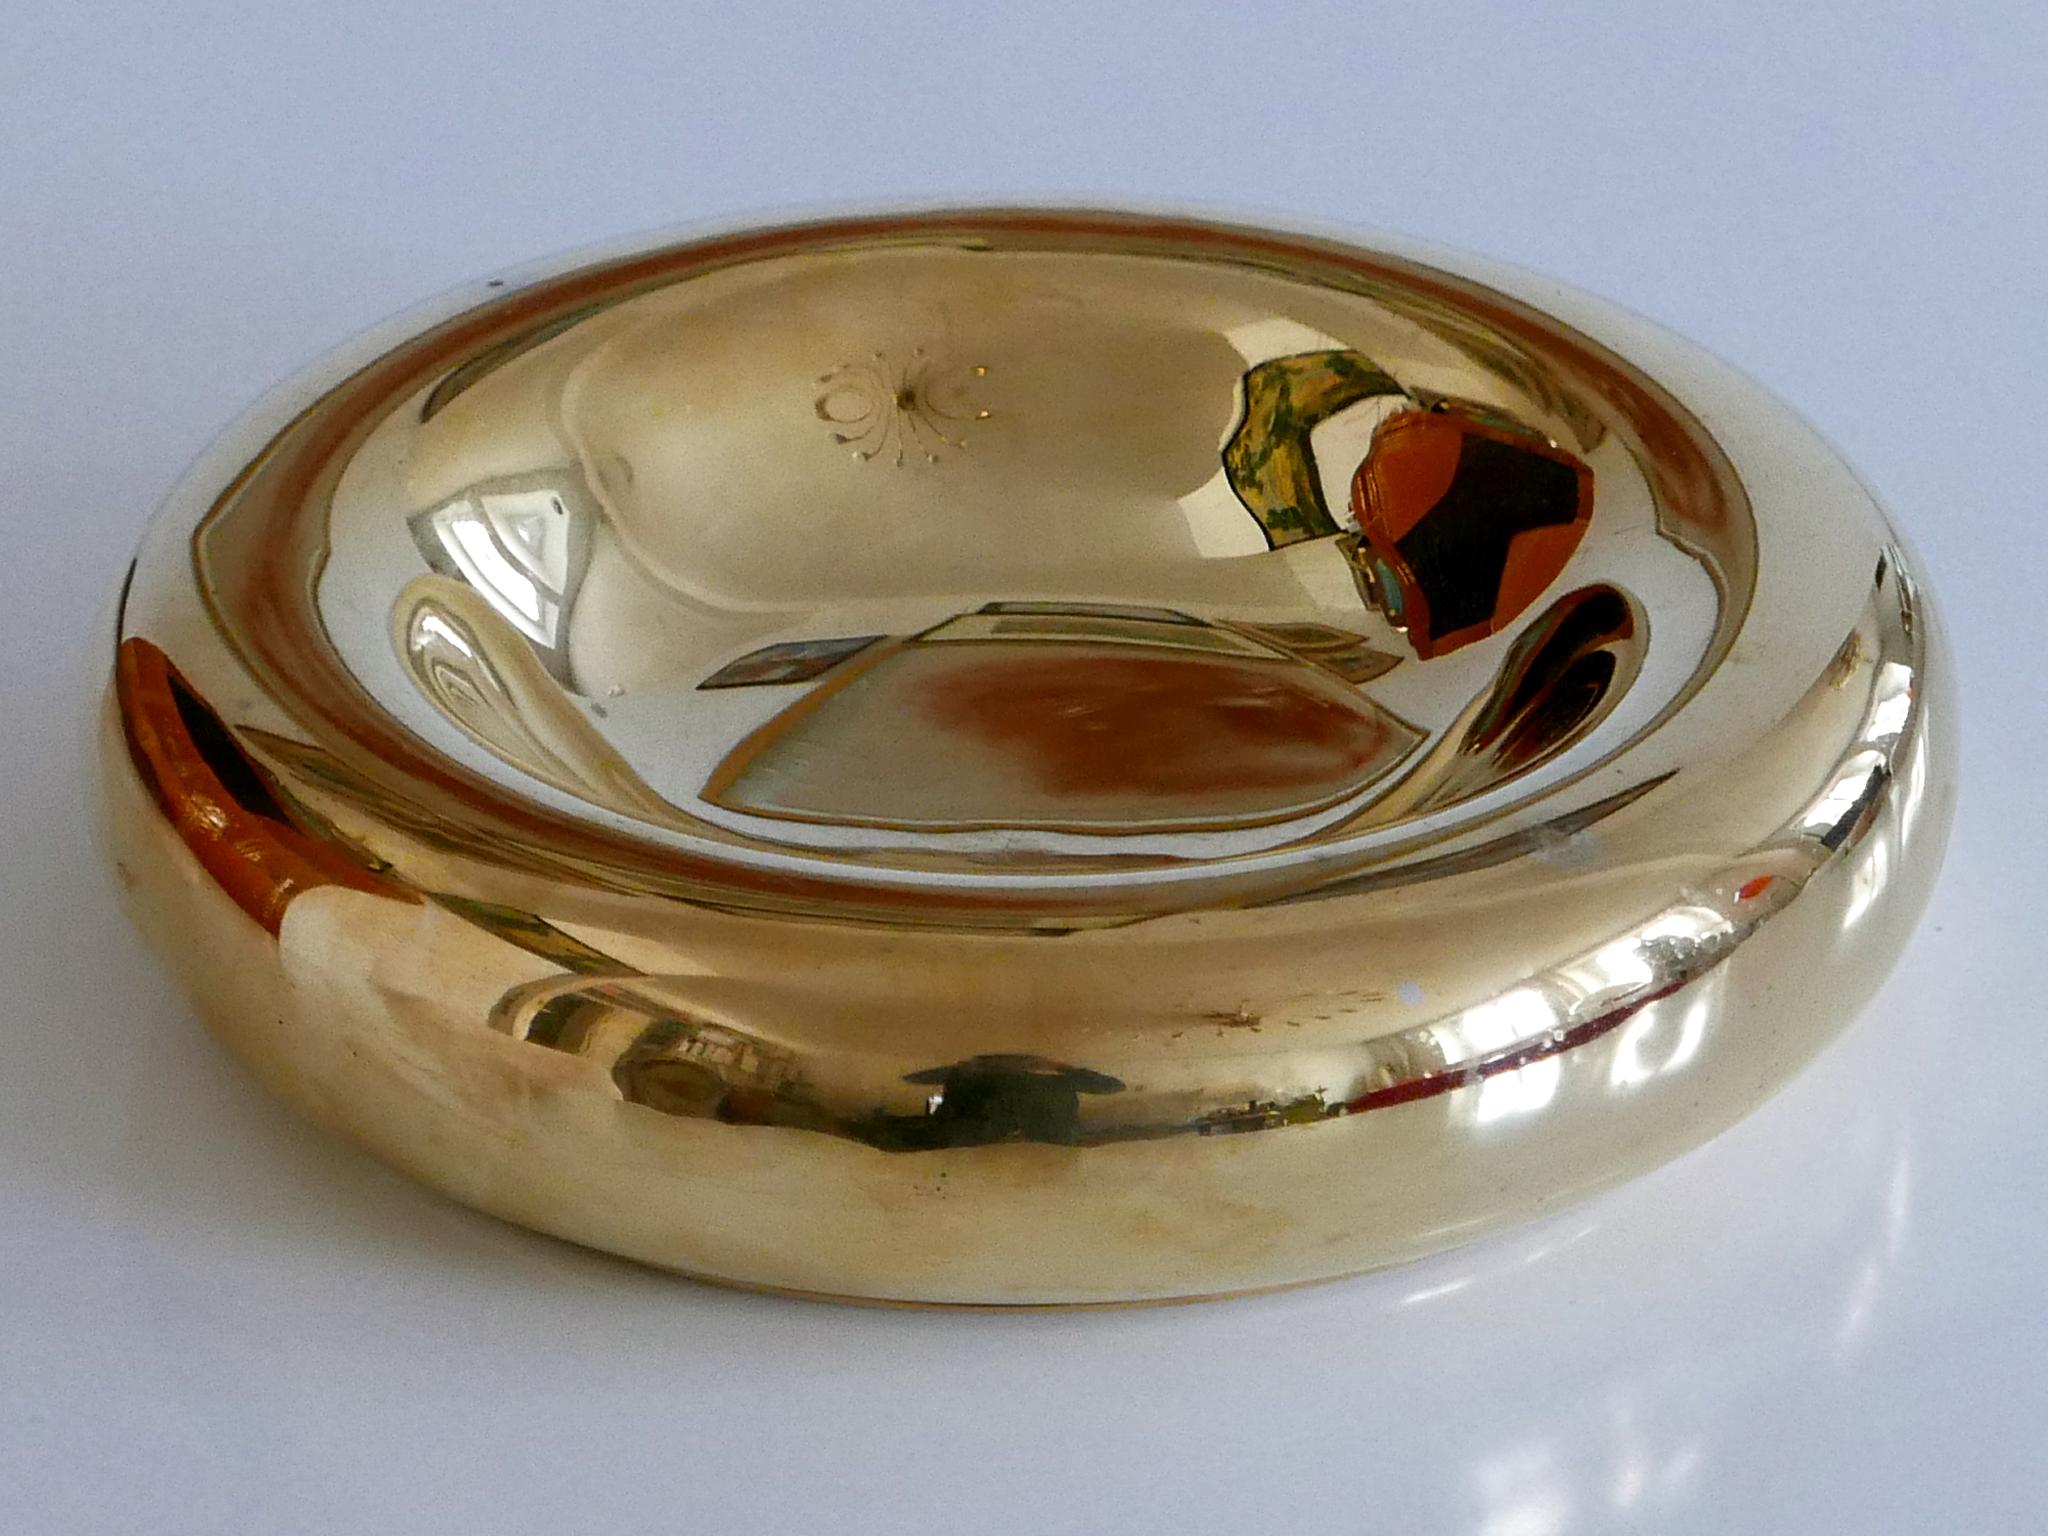 Polished Exceptional Mid-Century Modern Brass Bowl by Ingo Maurer for Design M, 1970s